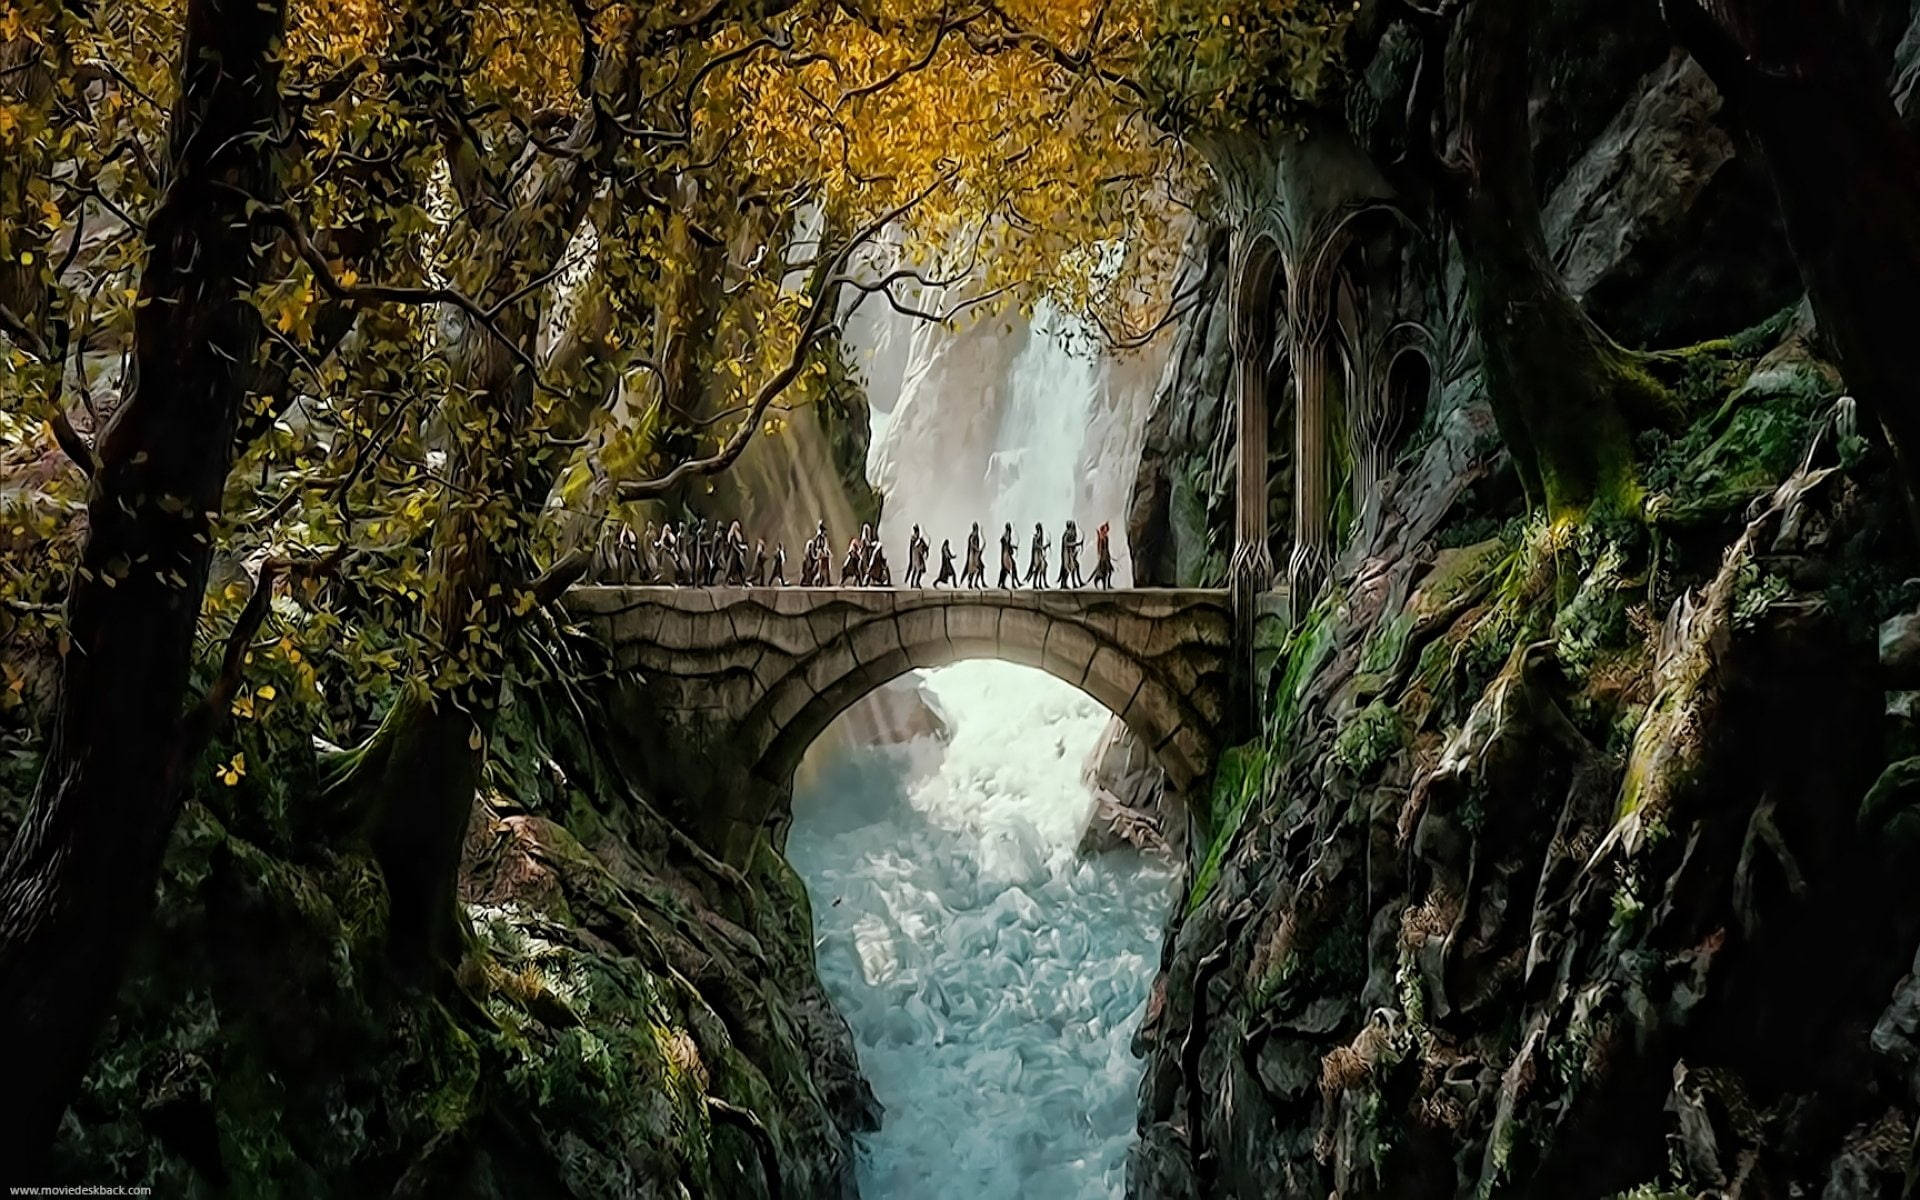 lord of the rings landscape wallpaper hd